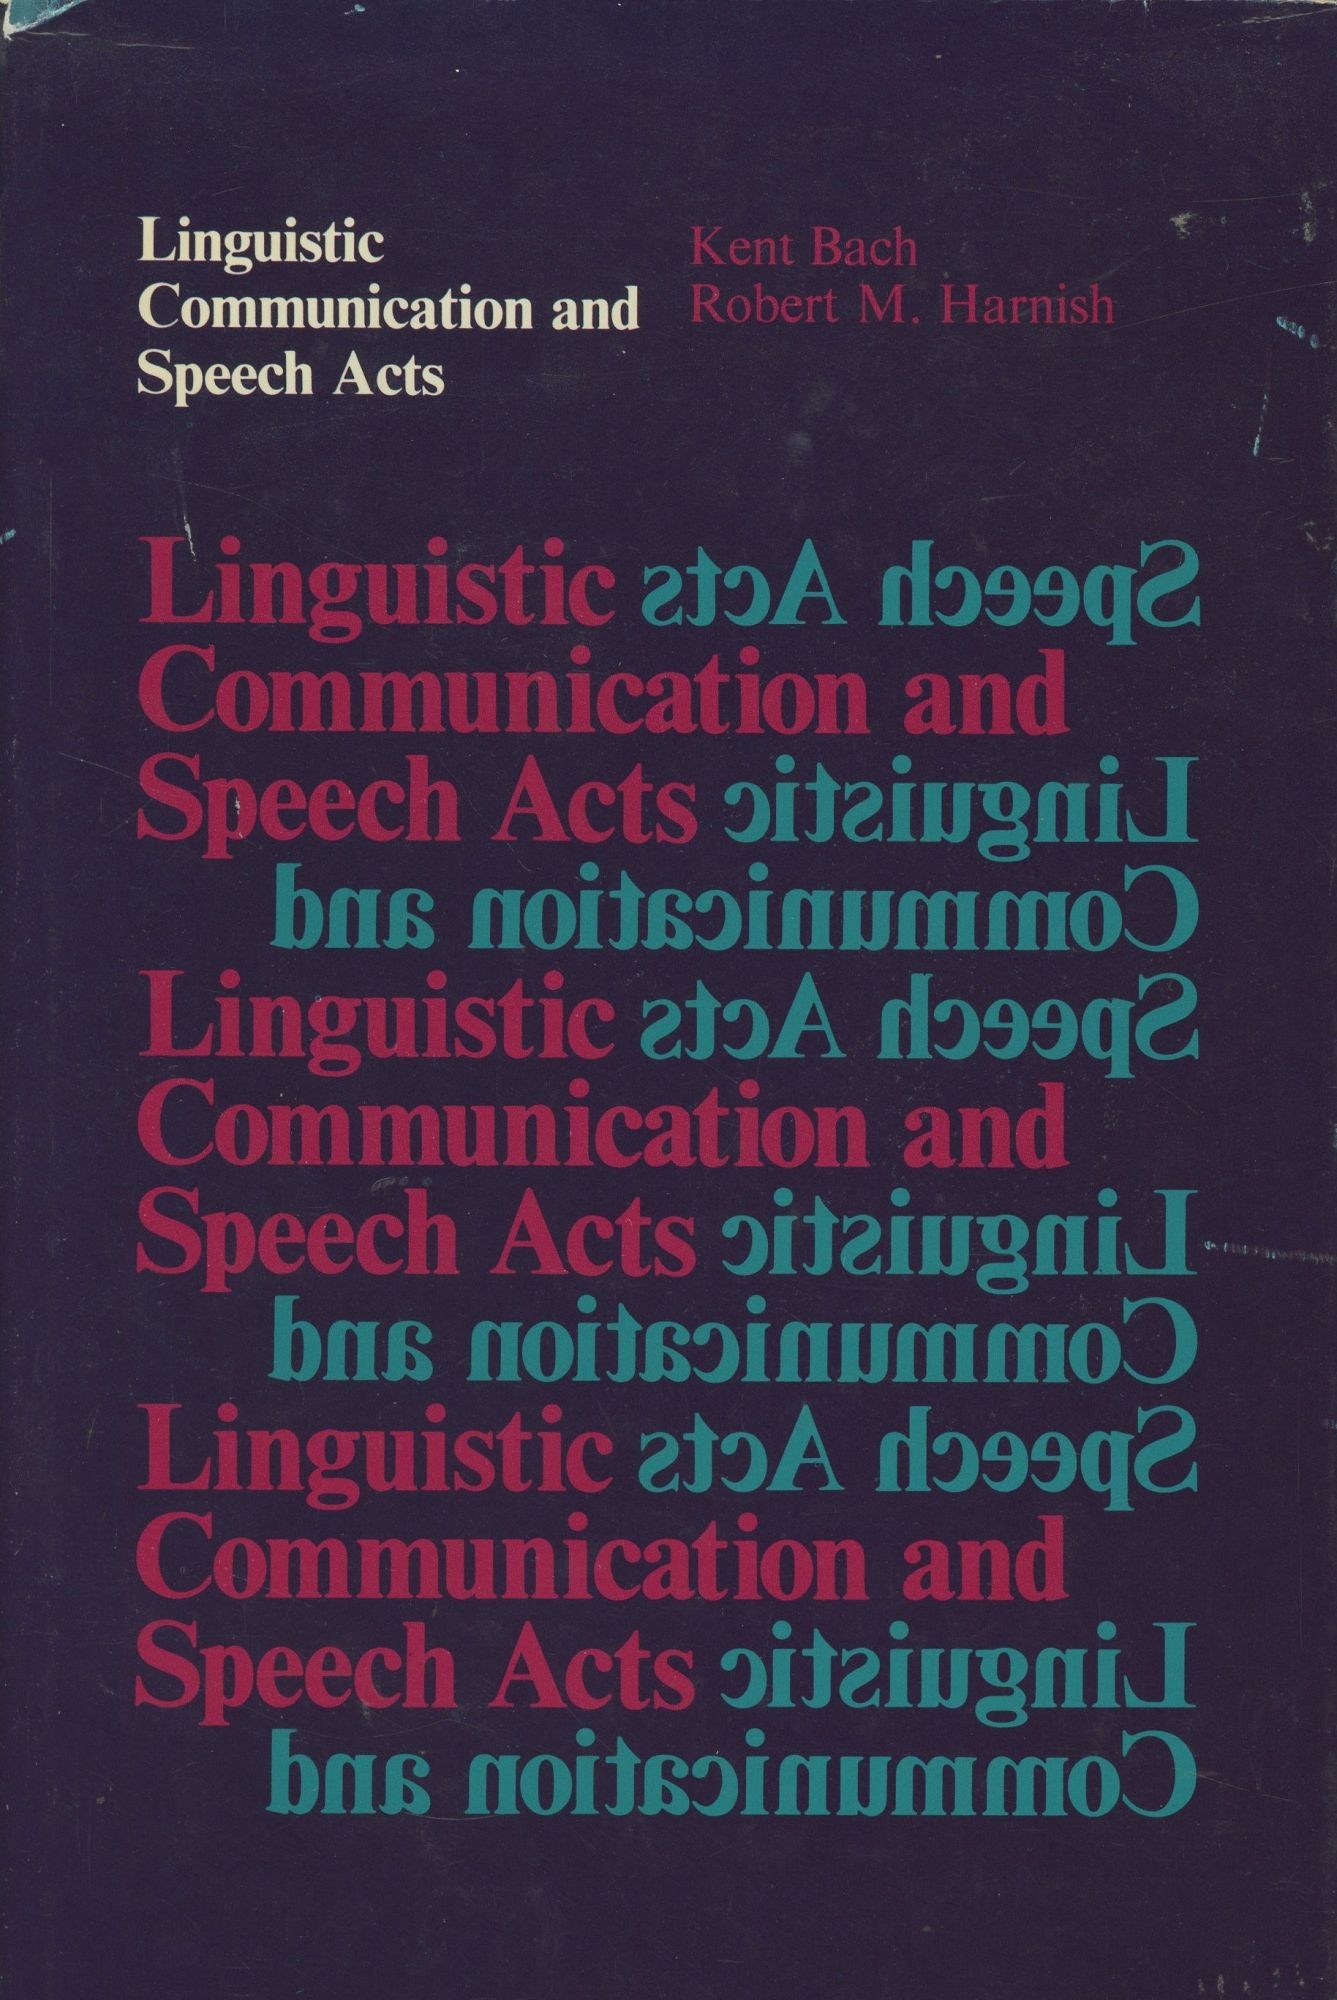 Linguistic Communication and Speech Acts